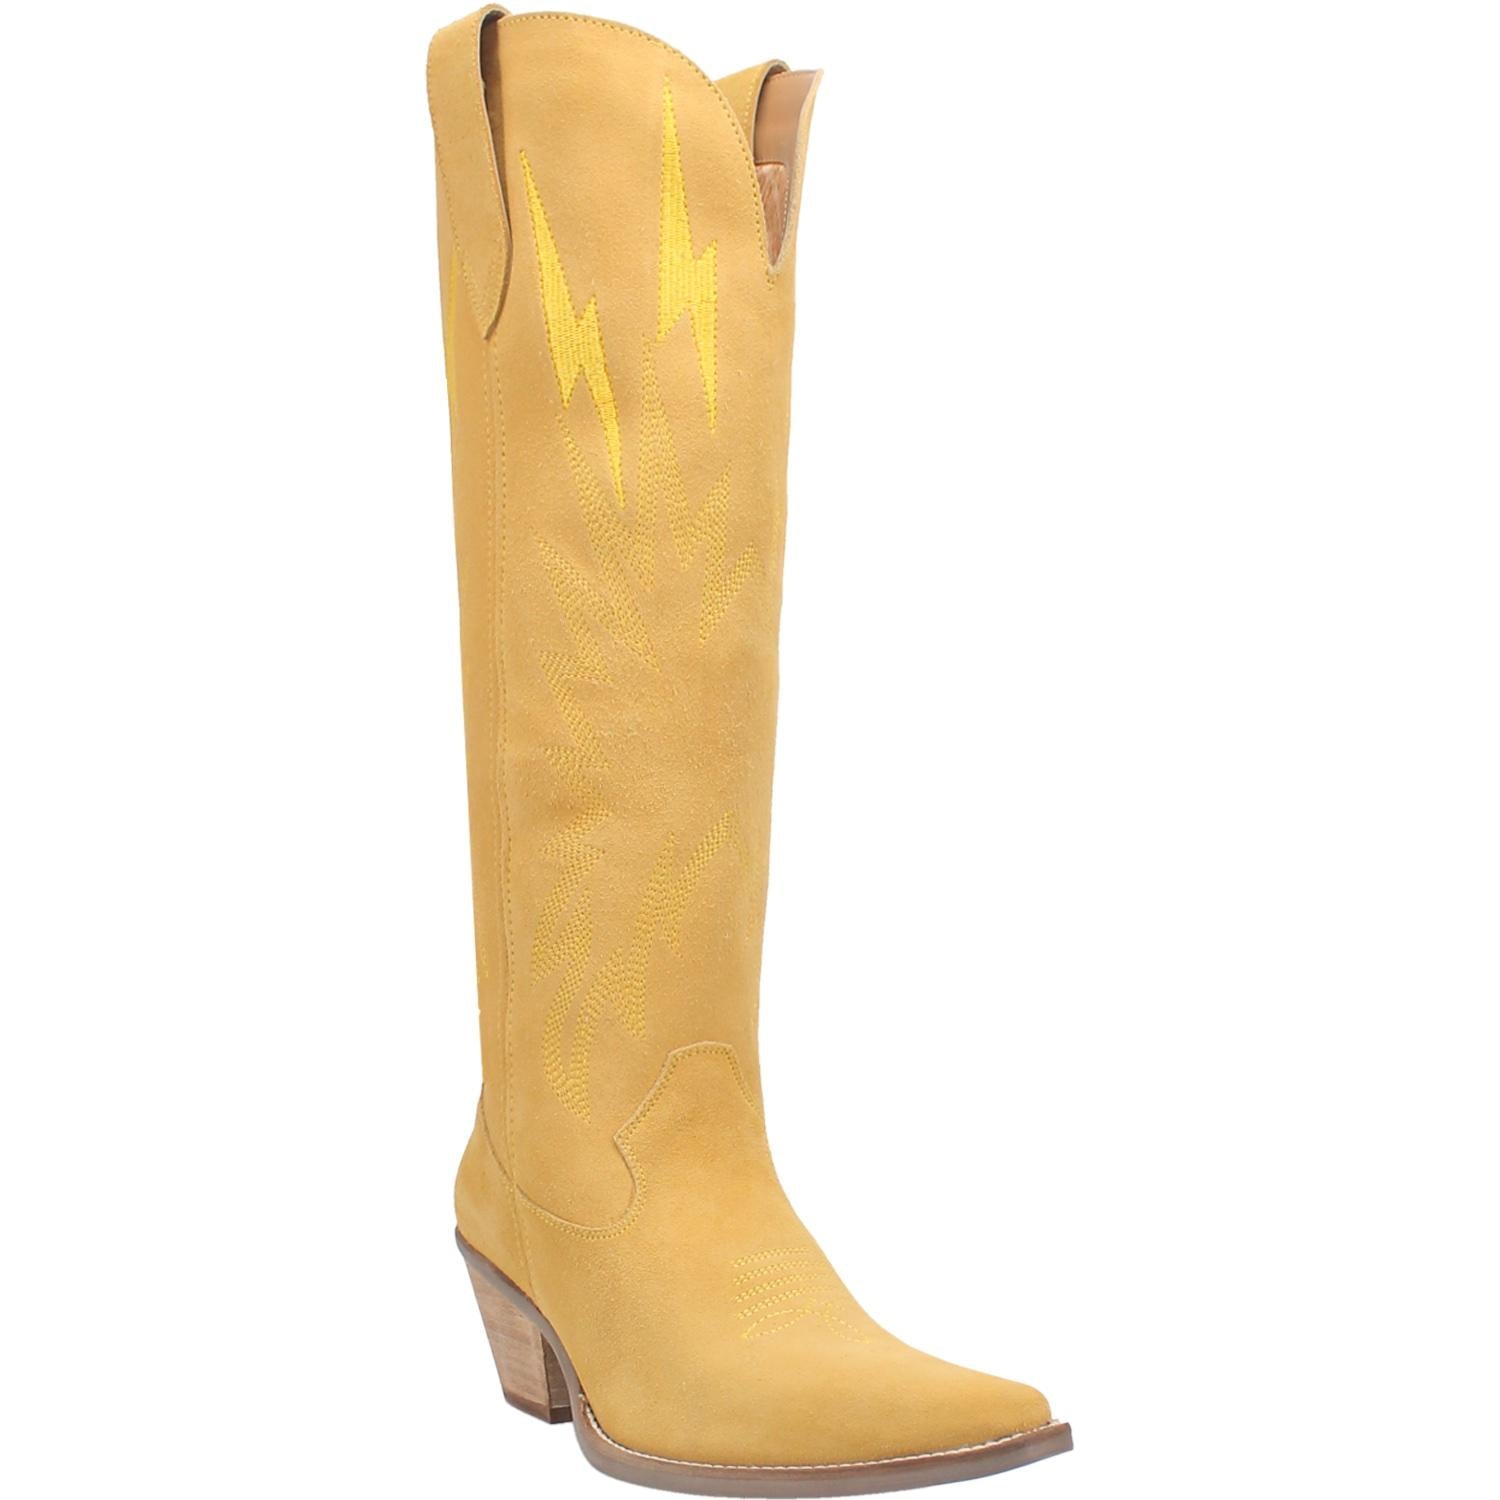 A tall yellow boot featuring rhinestone lightning designs, small heel, leather straps, and a V cut at the top. Item is pictured on a plain white background